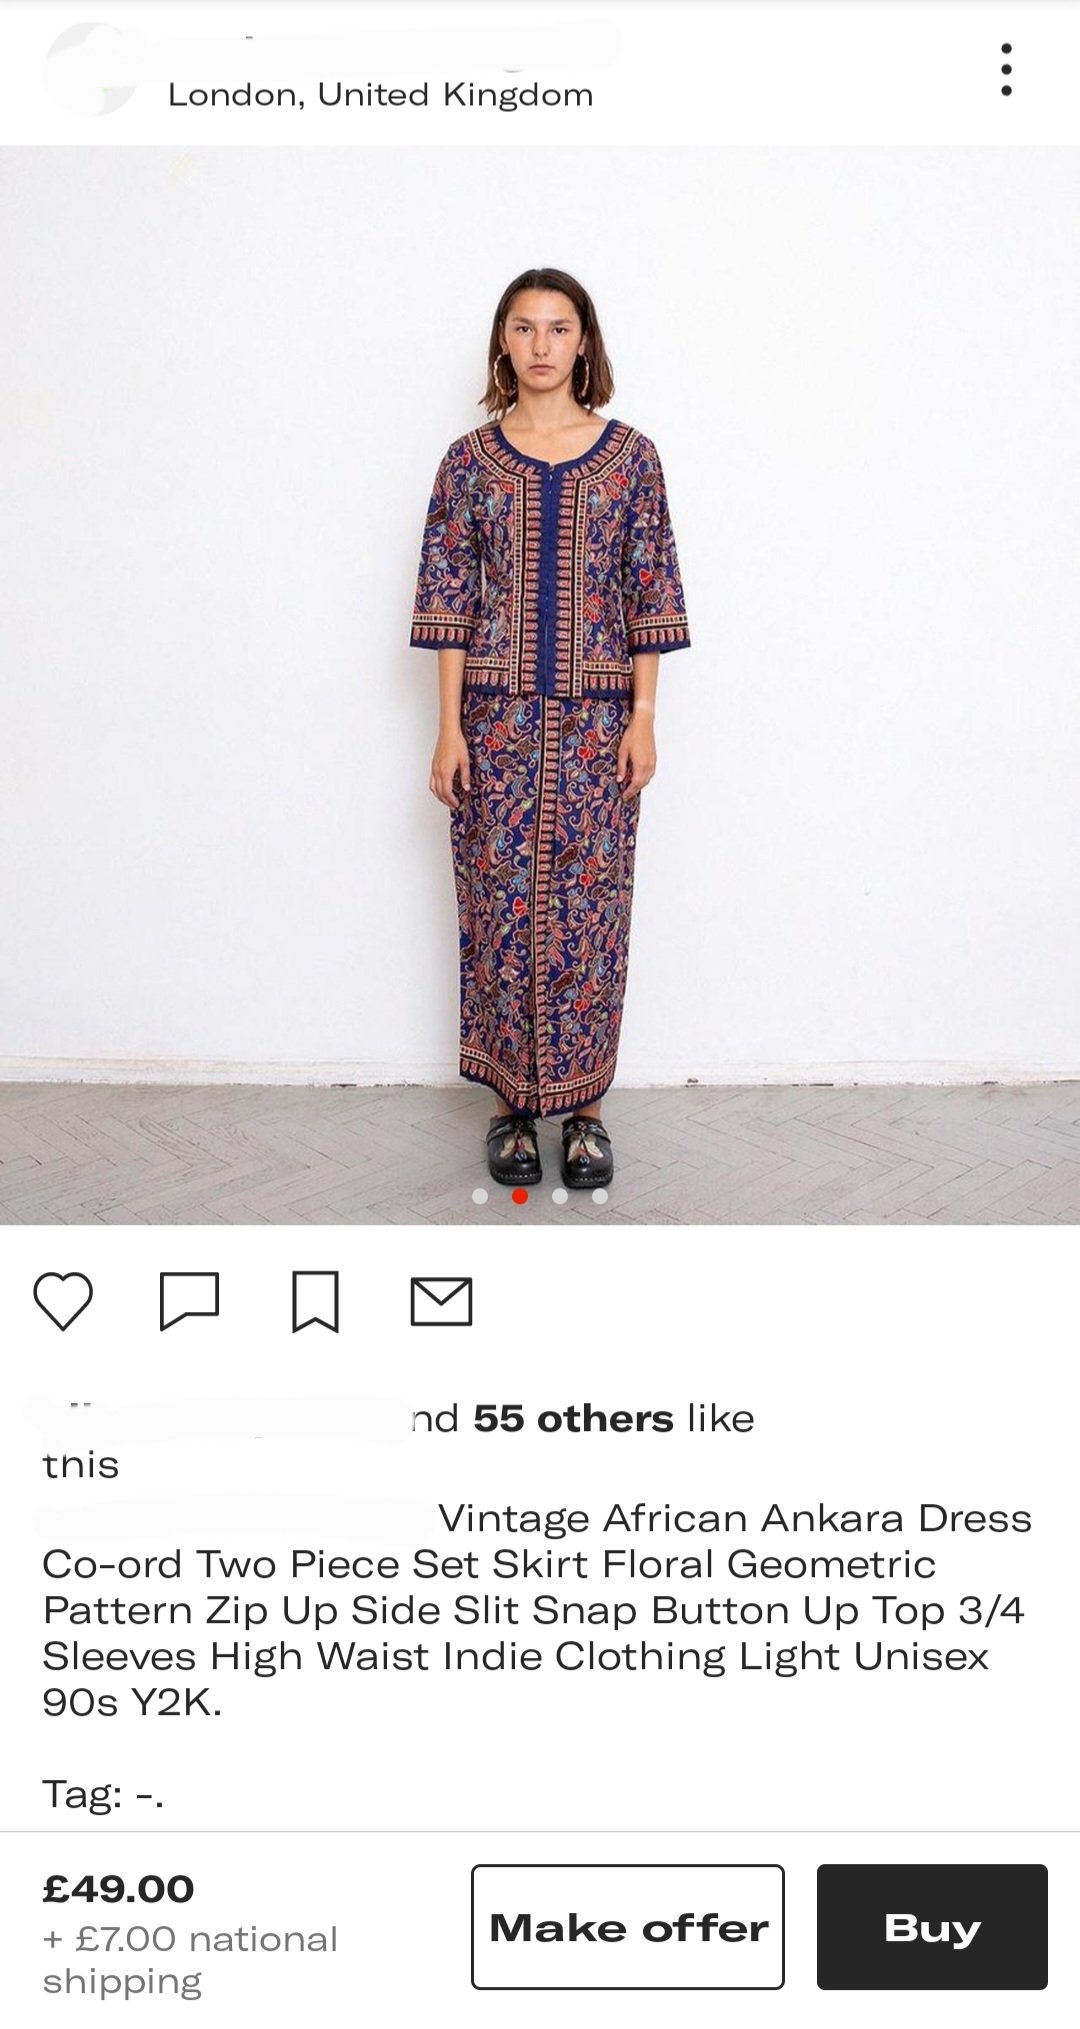 SIA Uniform Marketed As 'Vintage African' On Online Shopping Site ...